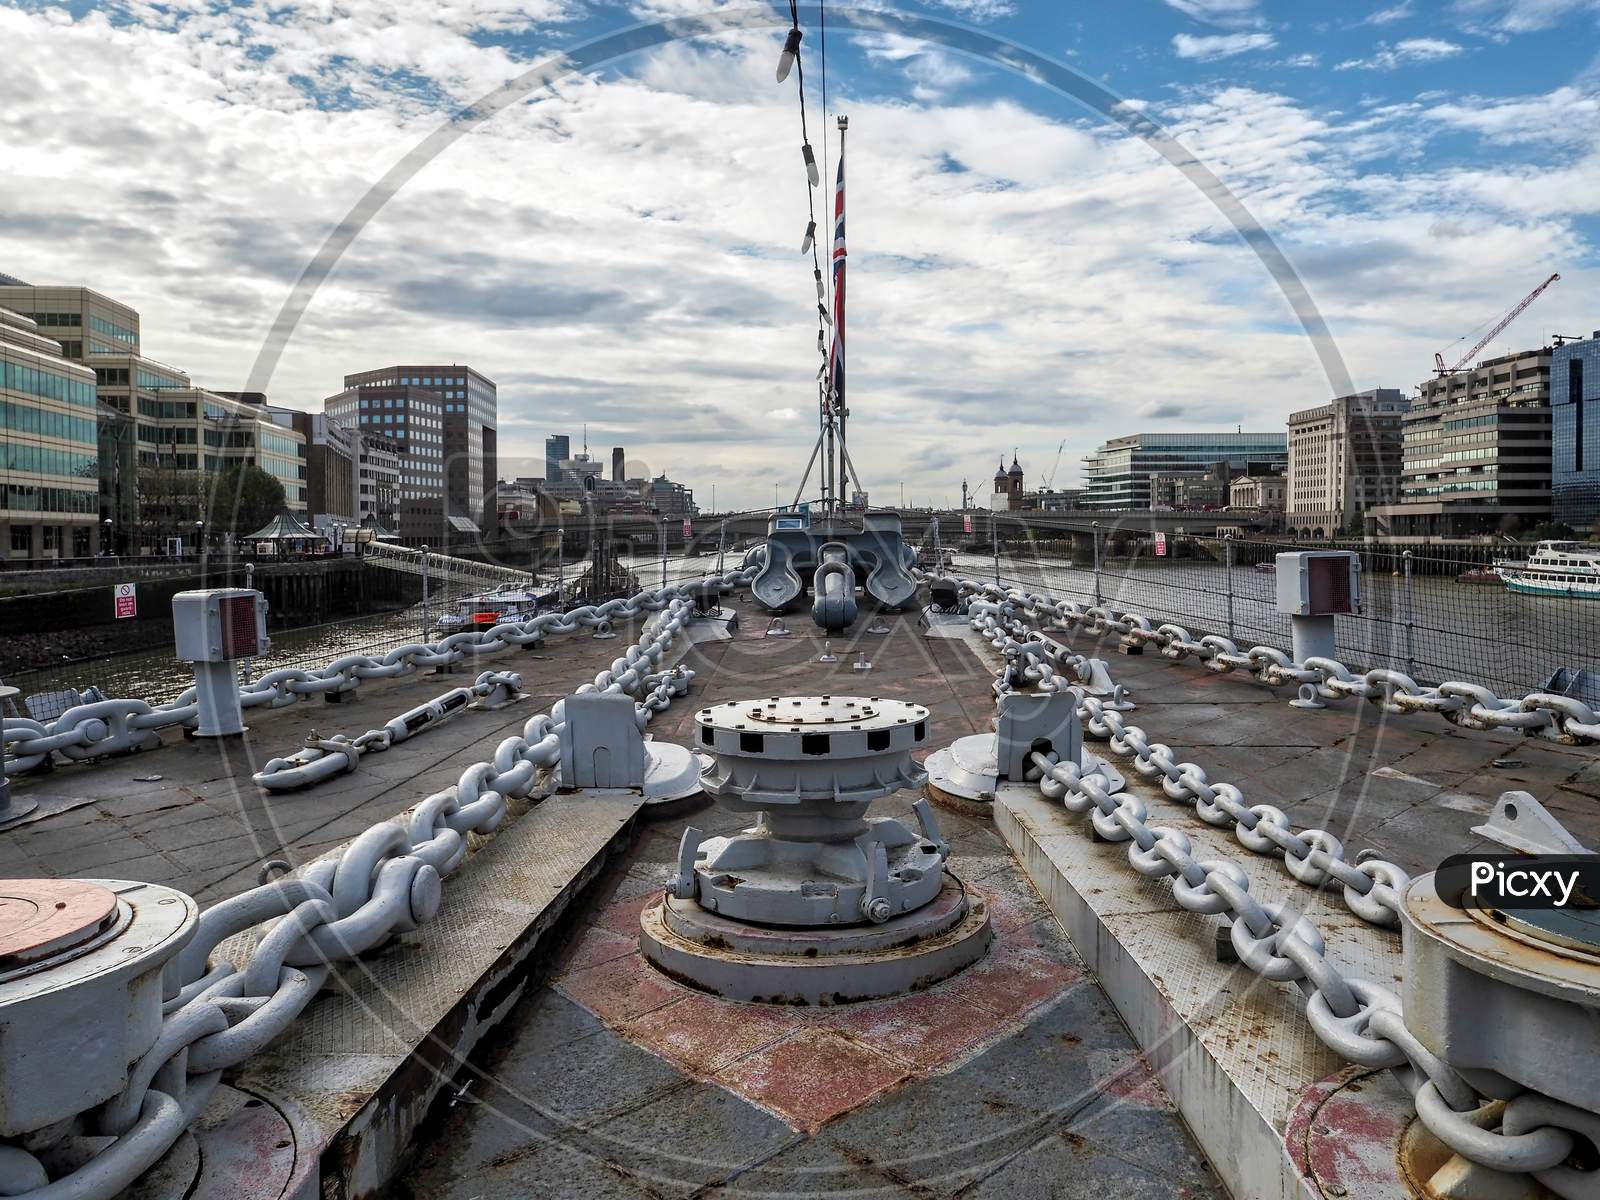 Anchor Chains On The Deck Of Hms Belfast